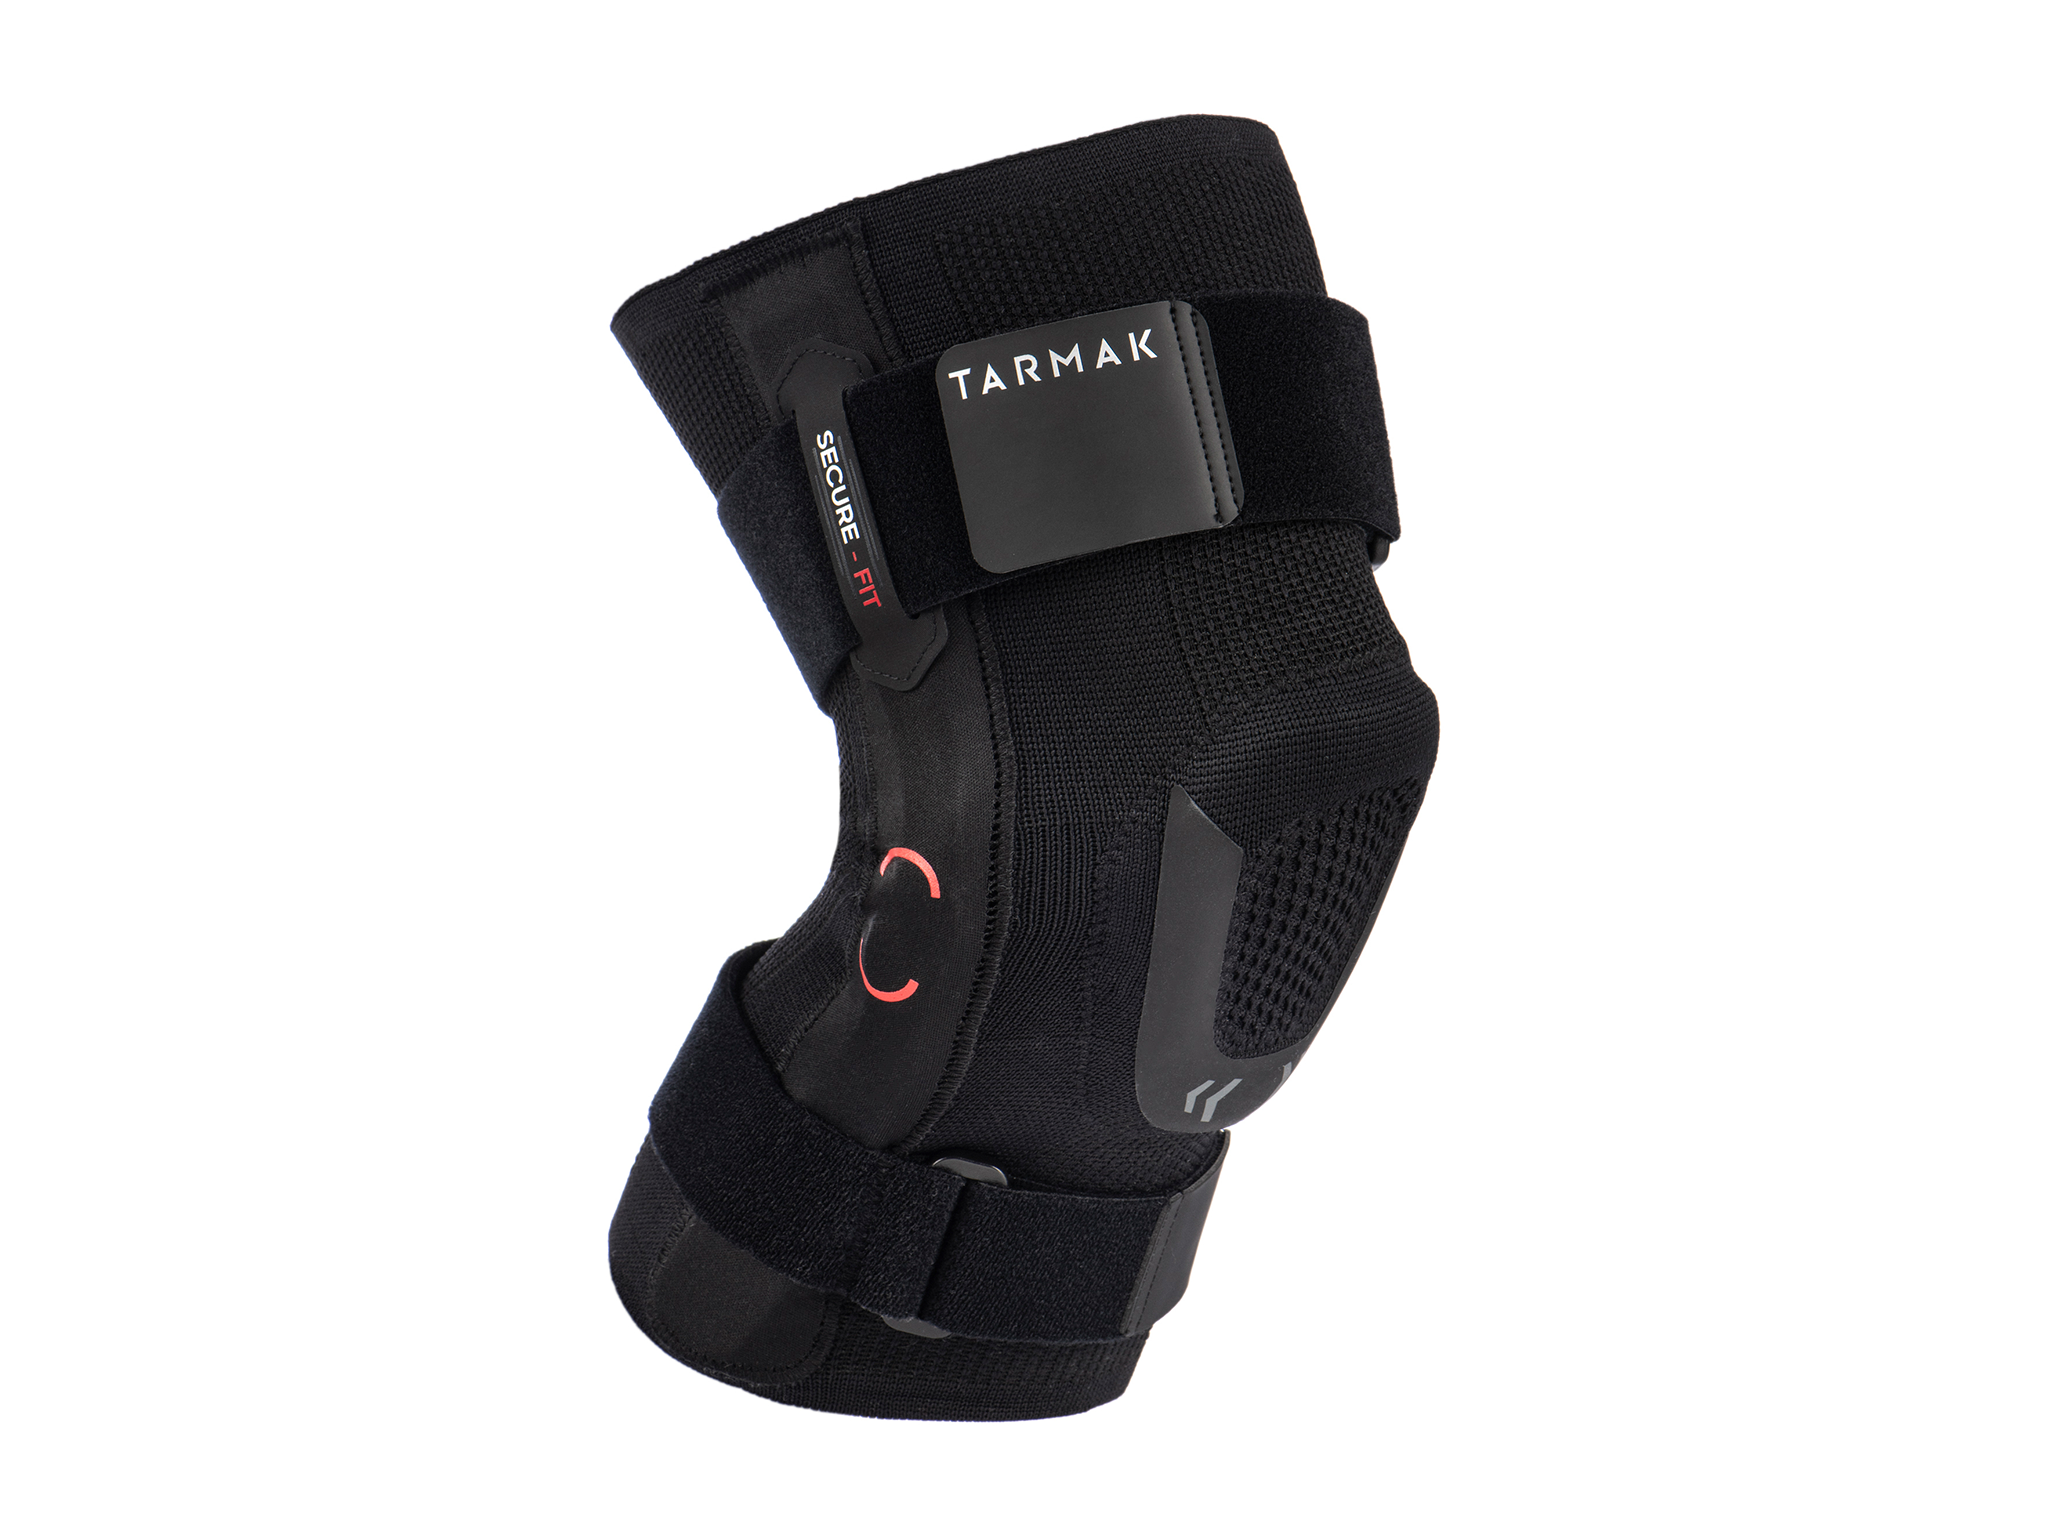 Decathlon knee ligament support strong 900.png